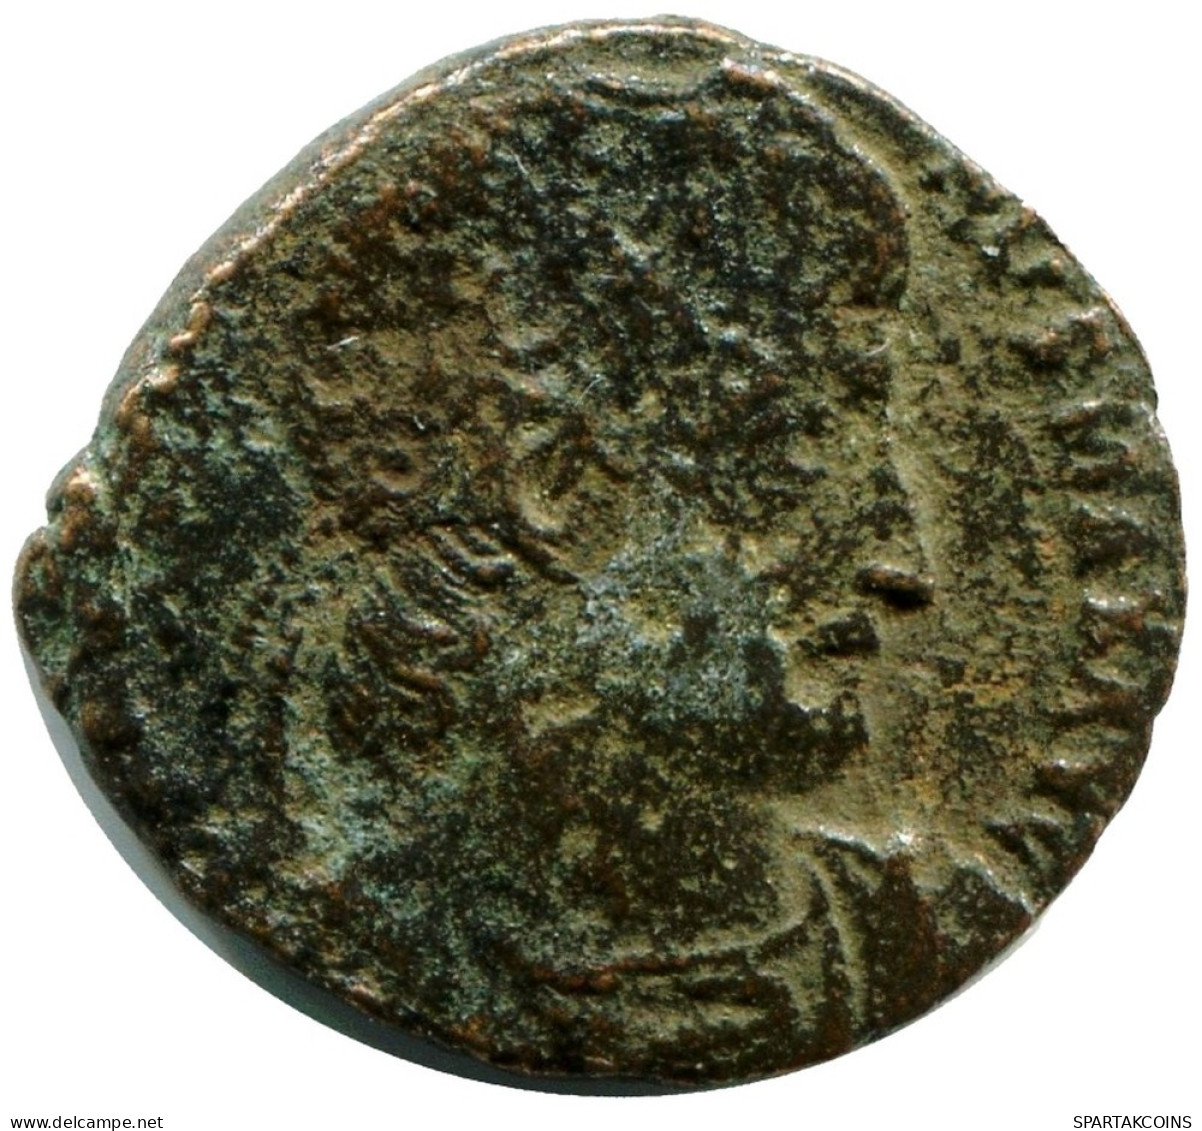 CONSTANTINE I MINTED IN ROME ITALY FROM THE ROYAL ONTARIO MUSEUM #ANC11184.14.D.A - The Christian Empire (307 AD Tot 363 AD)